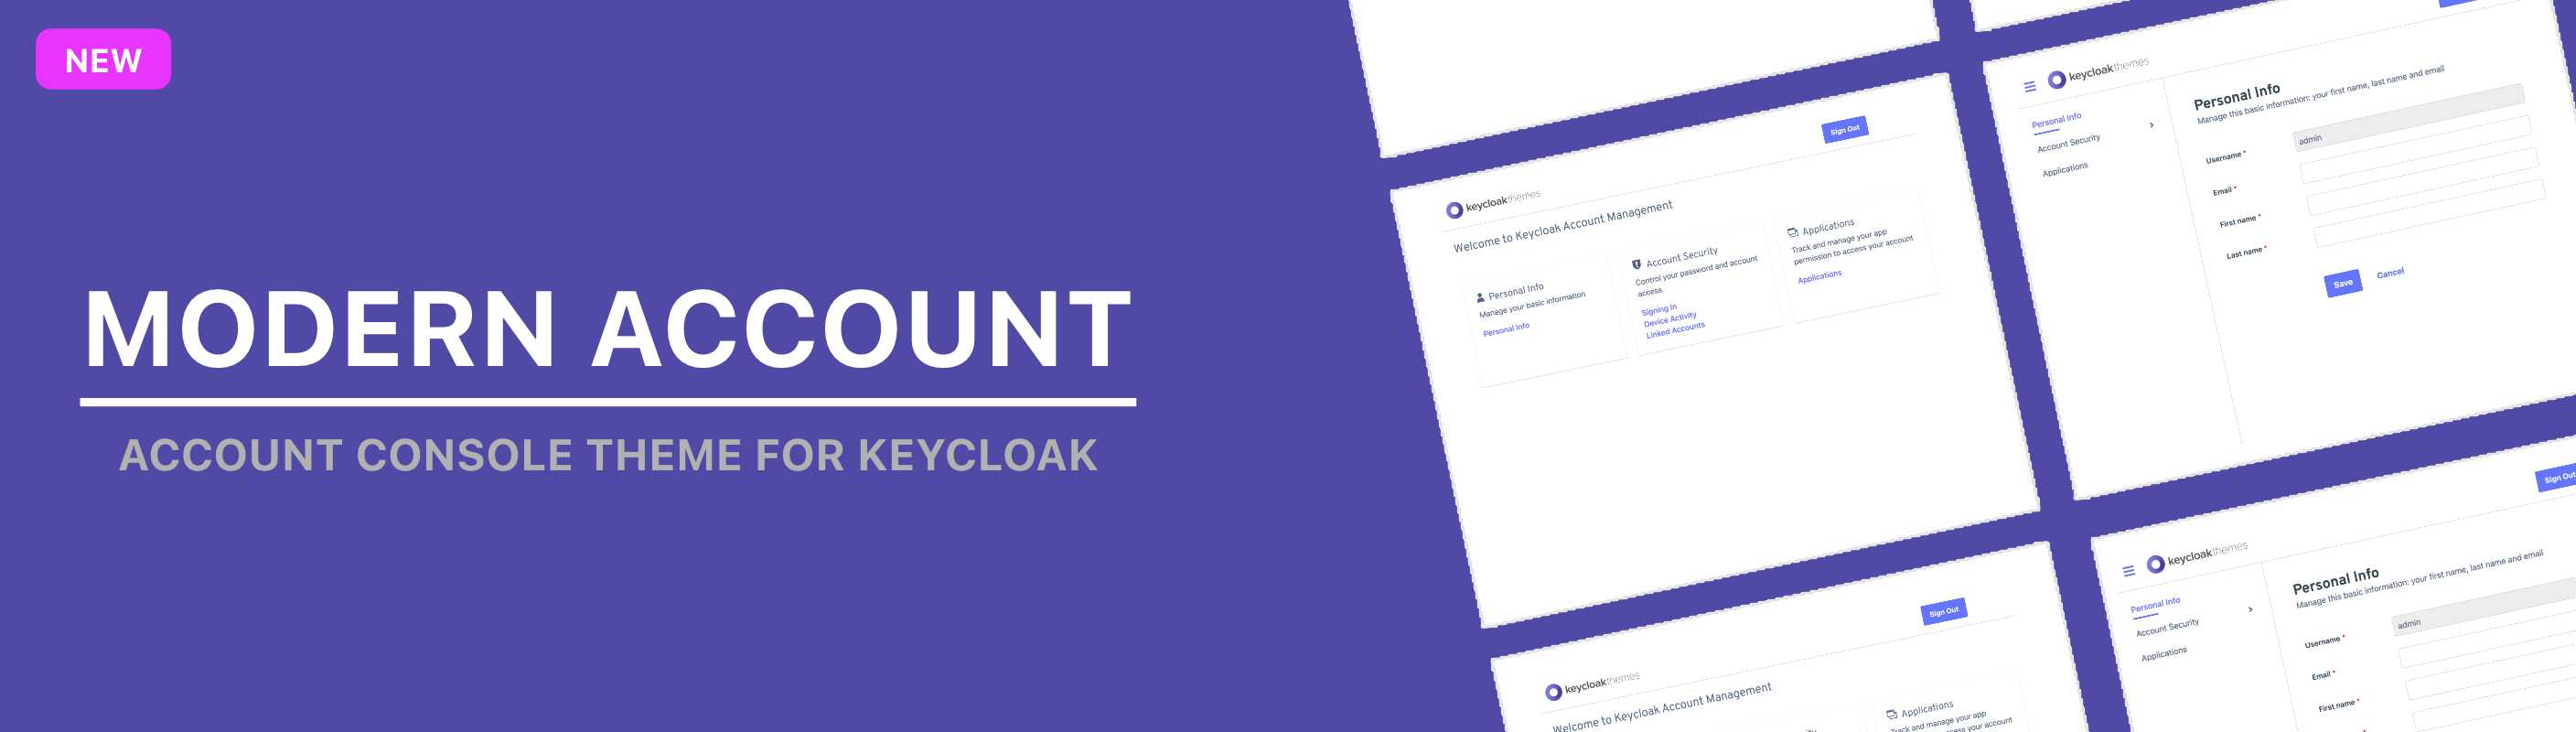 Modern Account is a responsive and clean Keycloak Account Console theme.